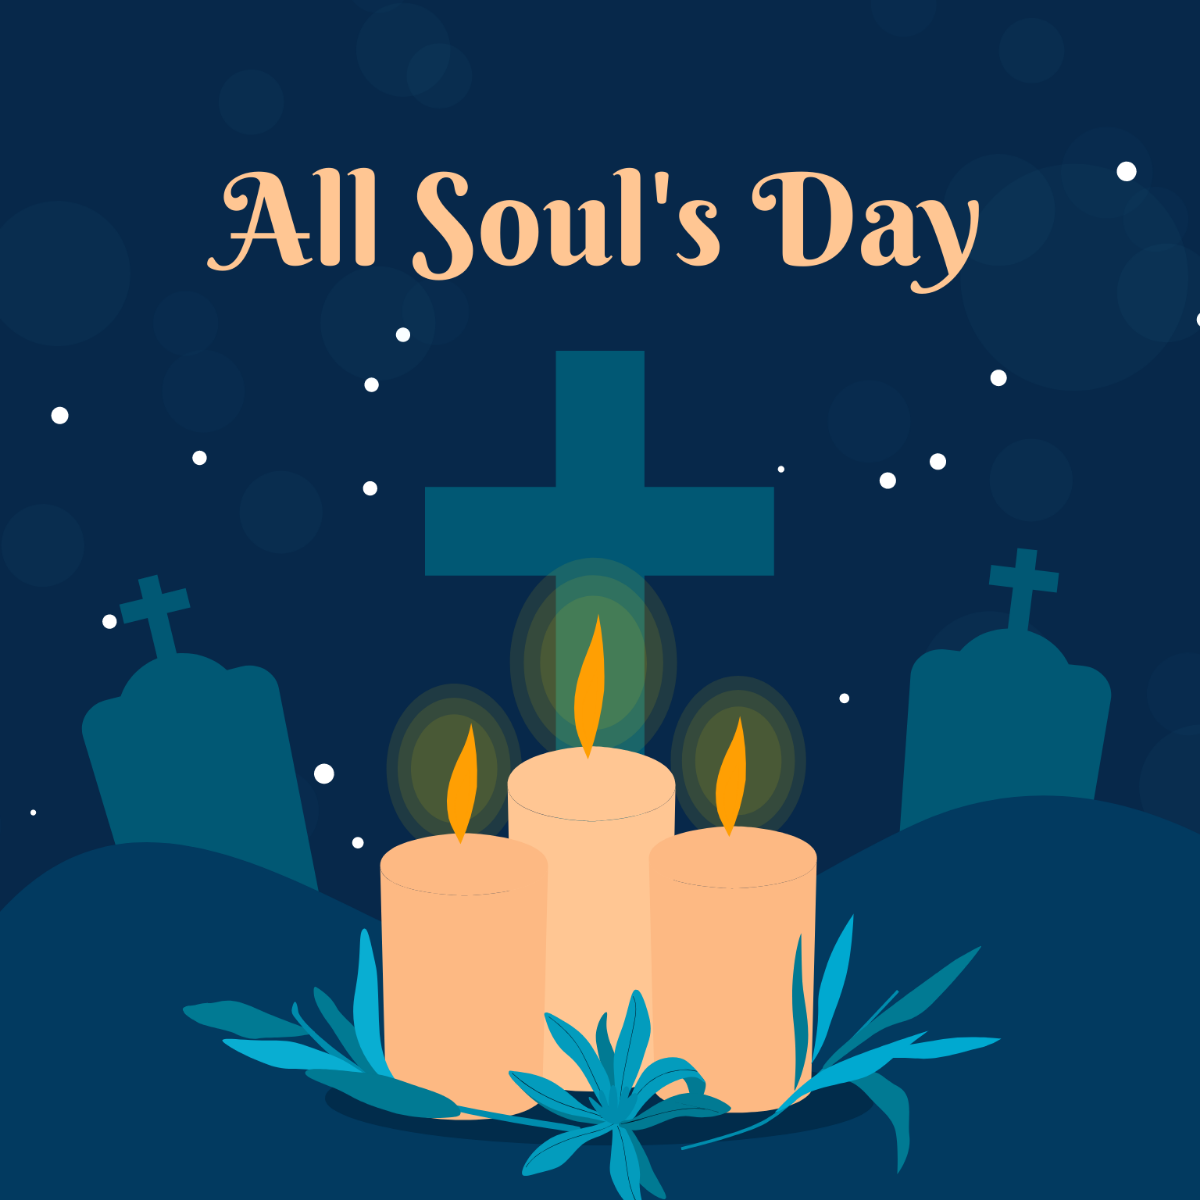 Happy All Souls' Day Illustration Template